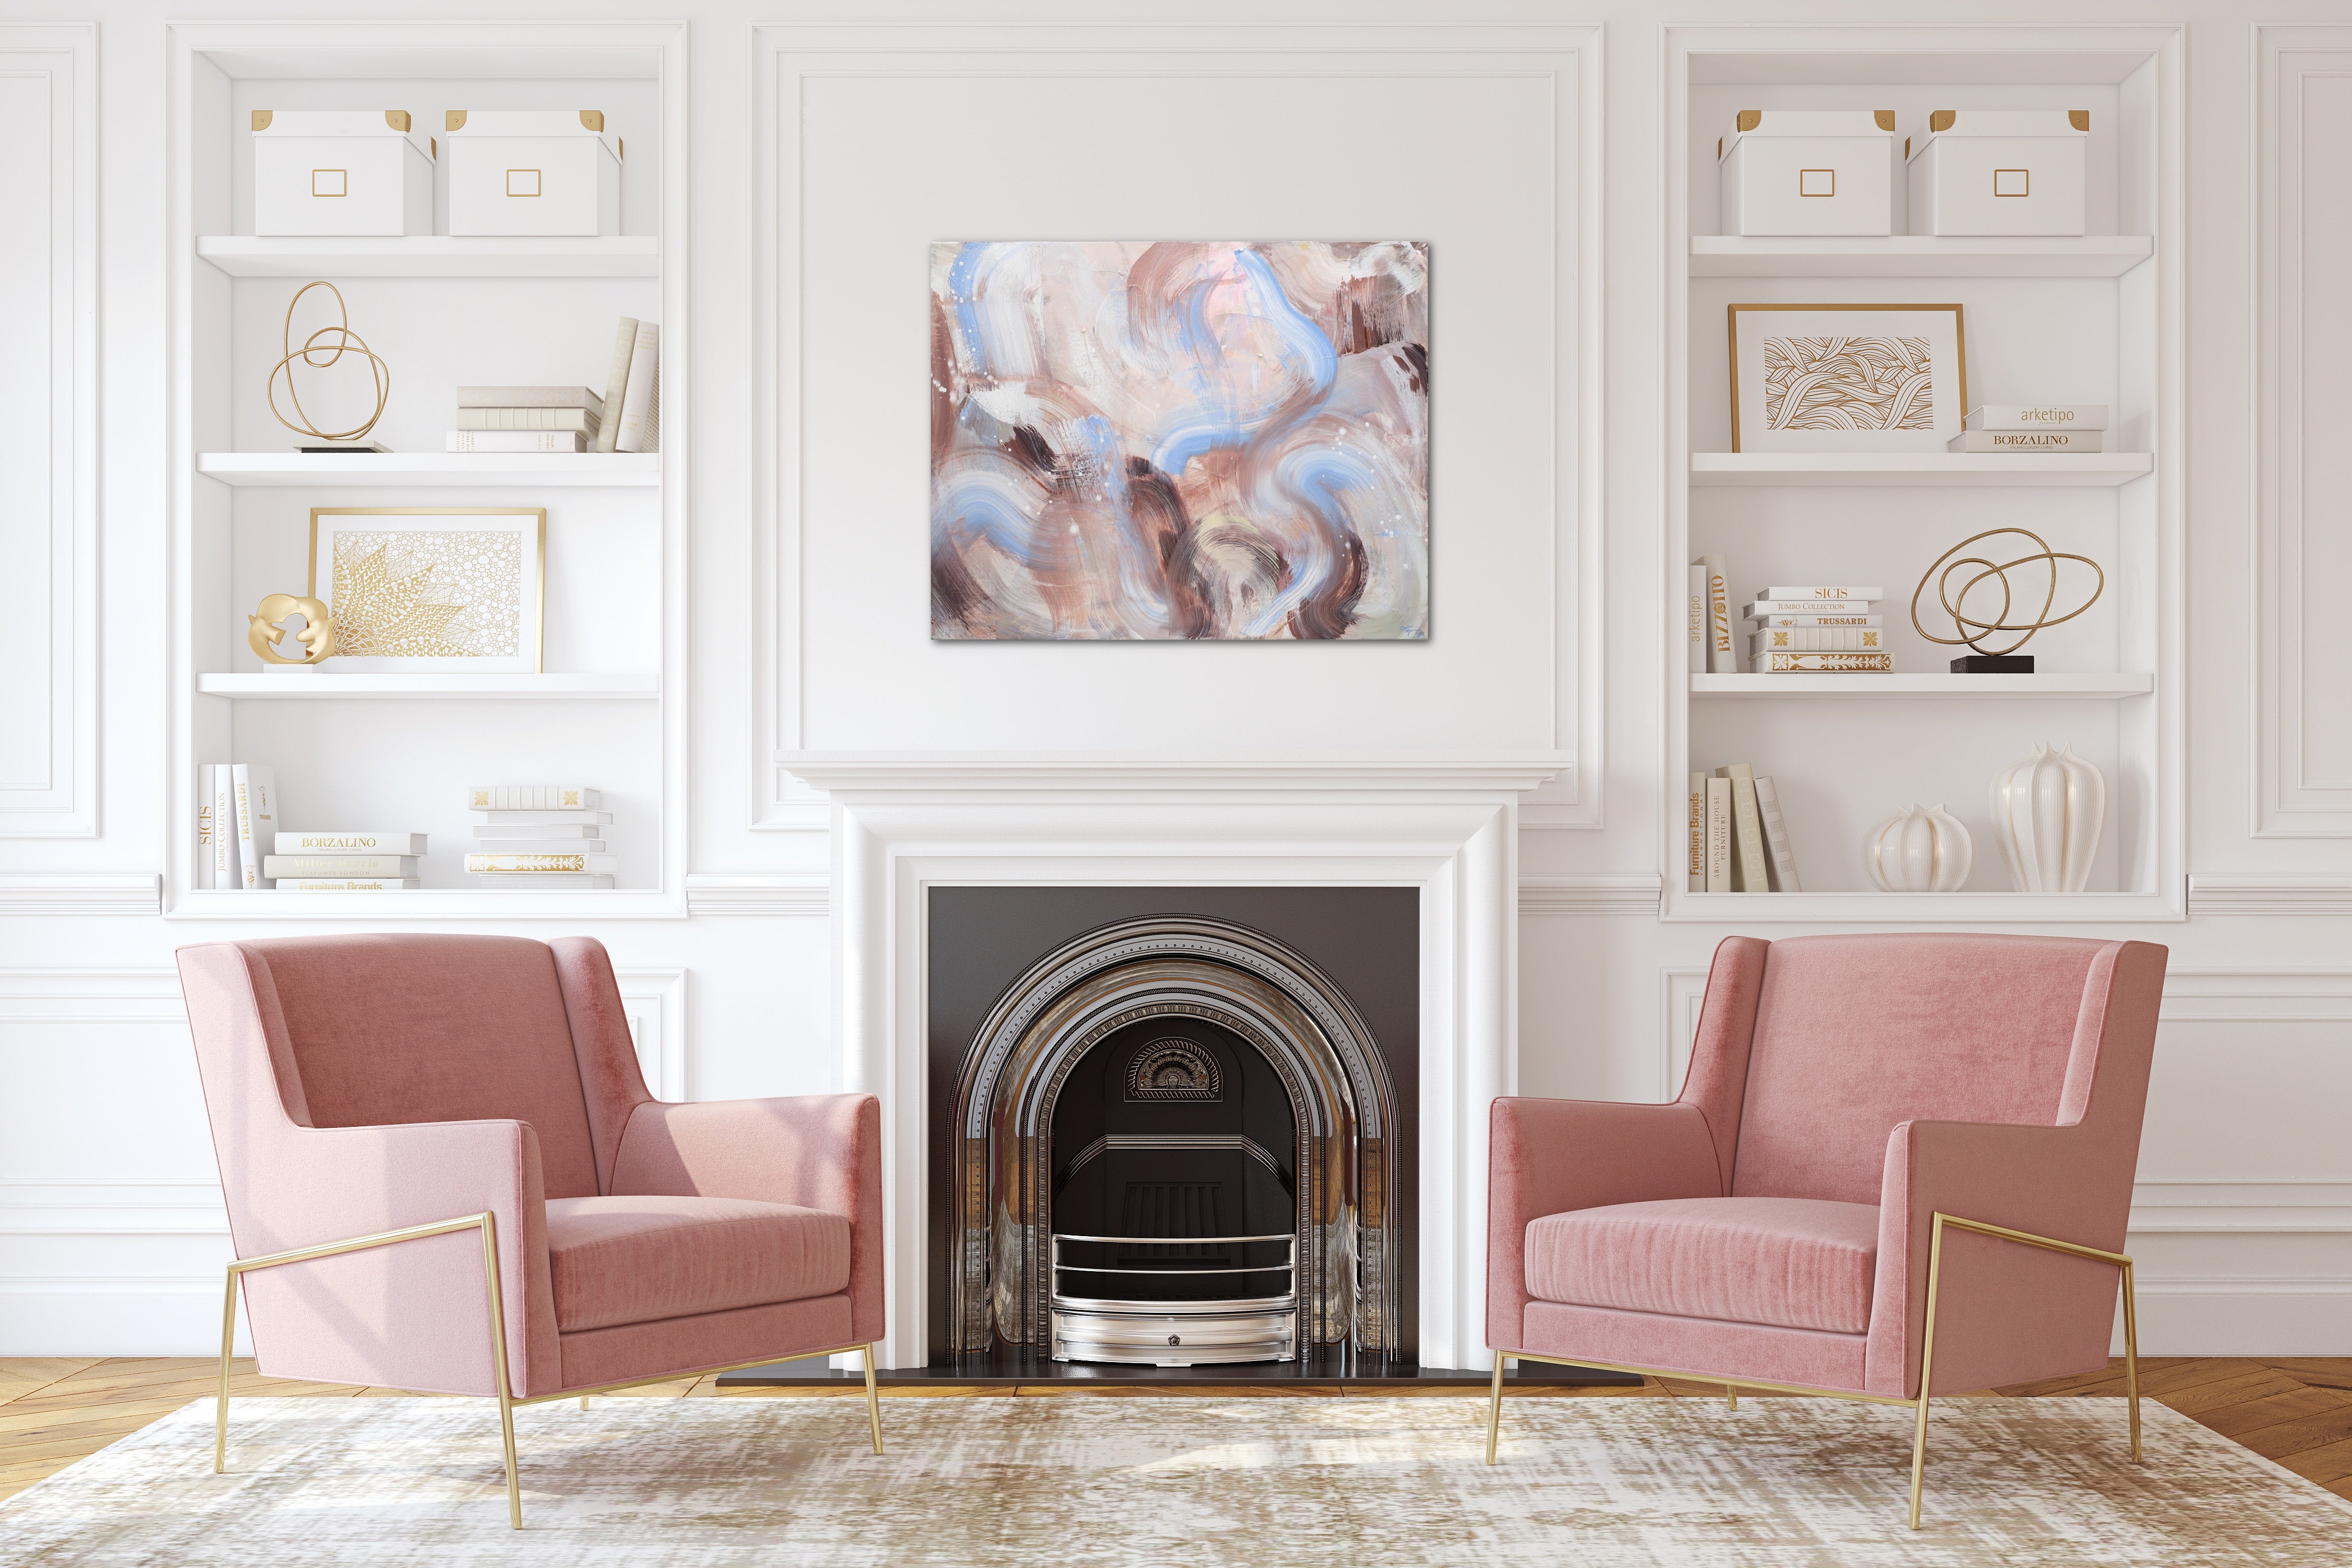 In an airy traditional modern living room, a modern brown, beige and sky blue painting on canvas hangs above the fireplace.  Built in shelves and two pink chairs flank the fireplace. 